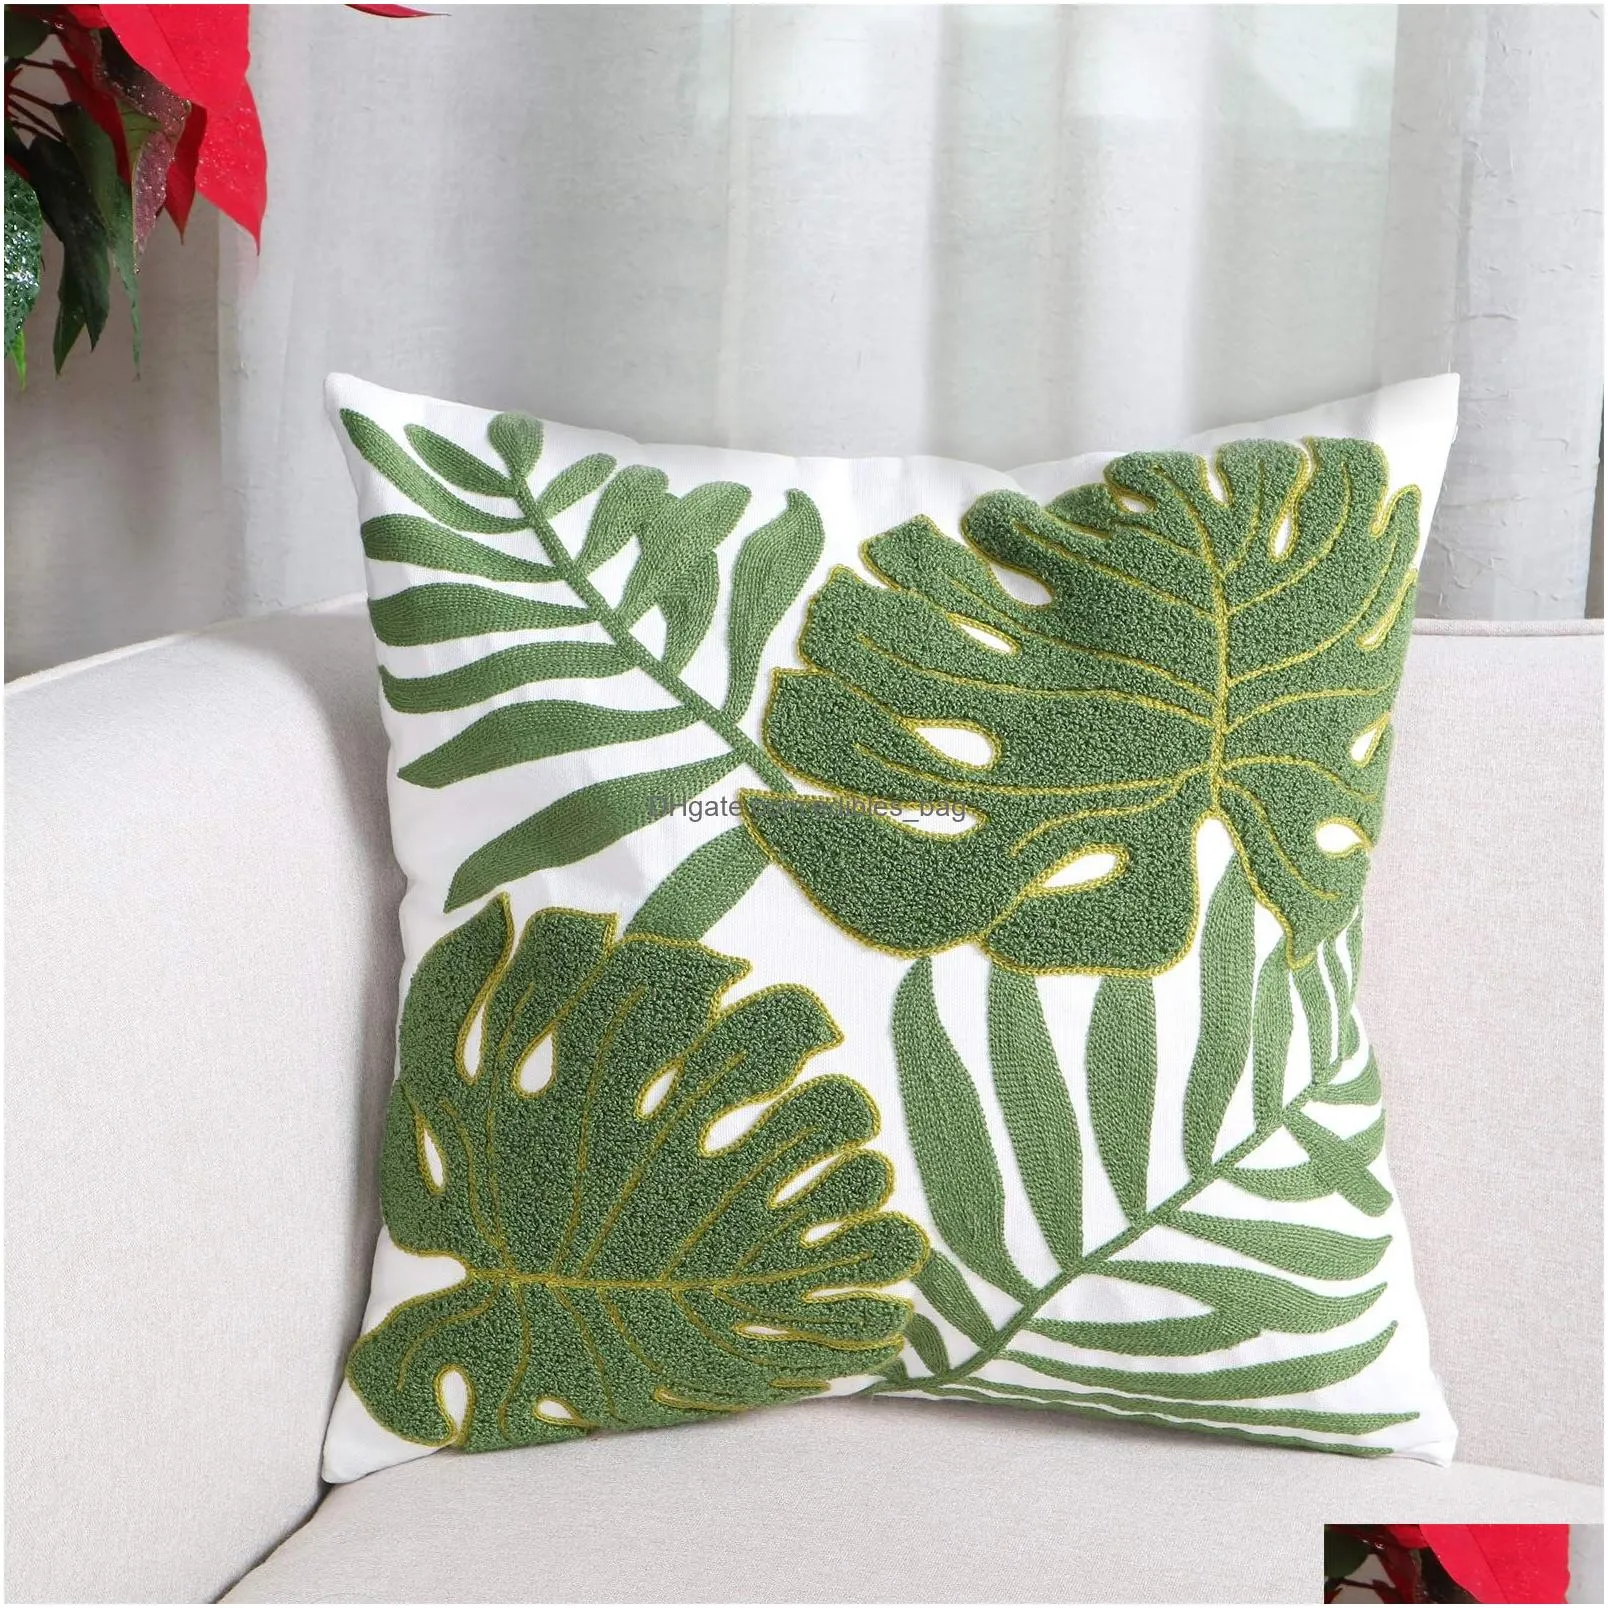 embroidery throw pillow covers 18x18 inch home decor tropical leaf palm pattern pillow cover for couch 100% cotton canvas cushion cover plant monstera leaf